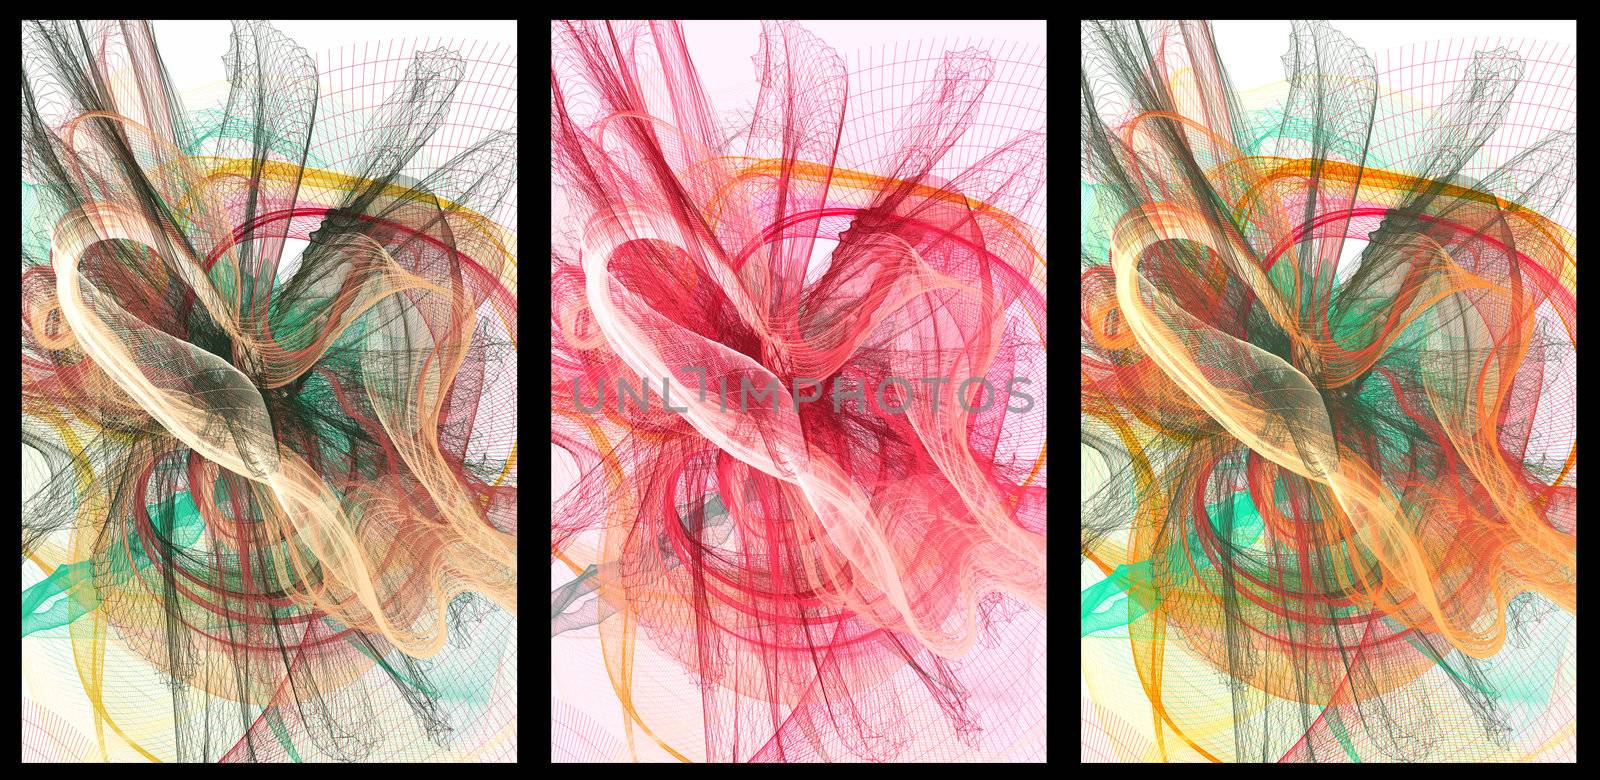 Abstract Background paper flow and creative artwork by jaggat